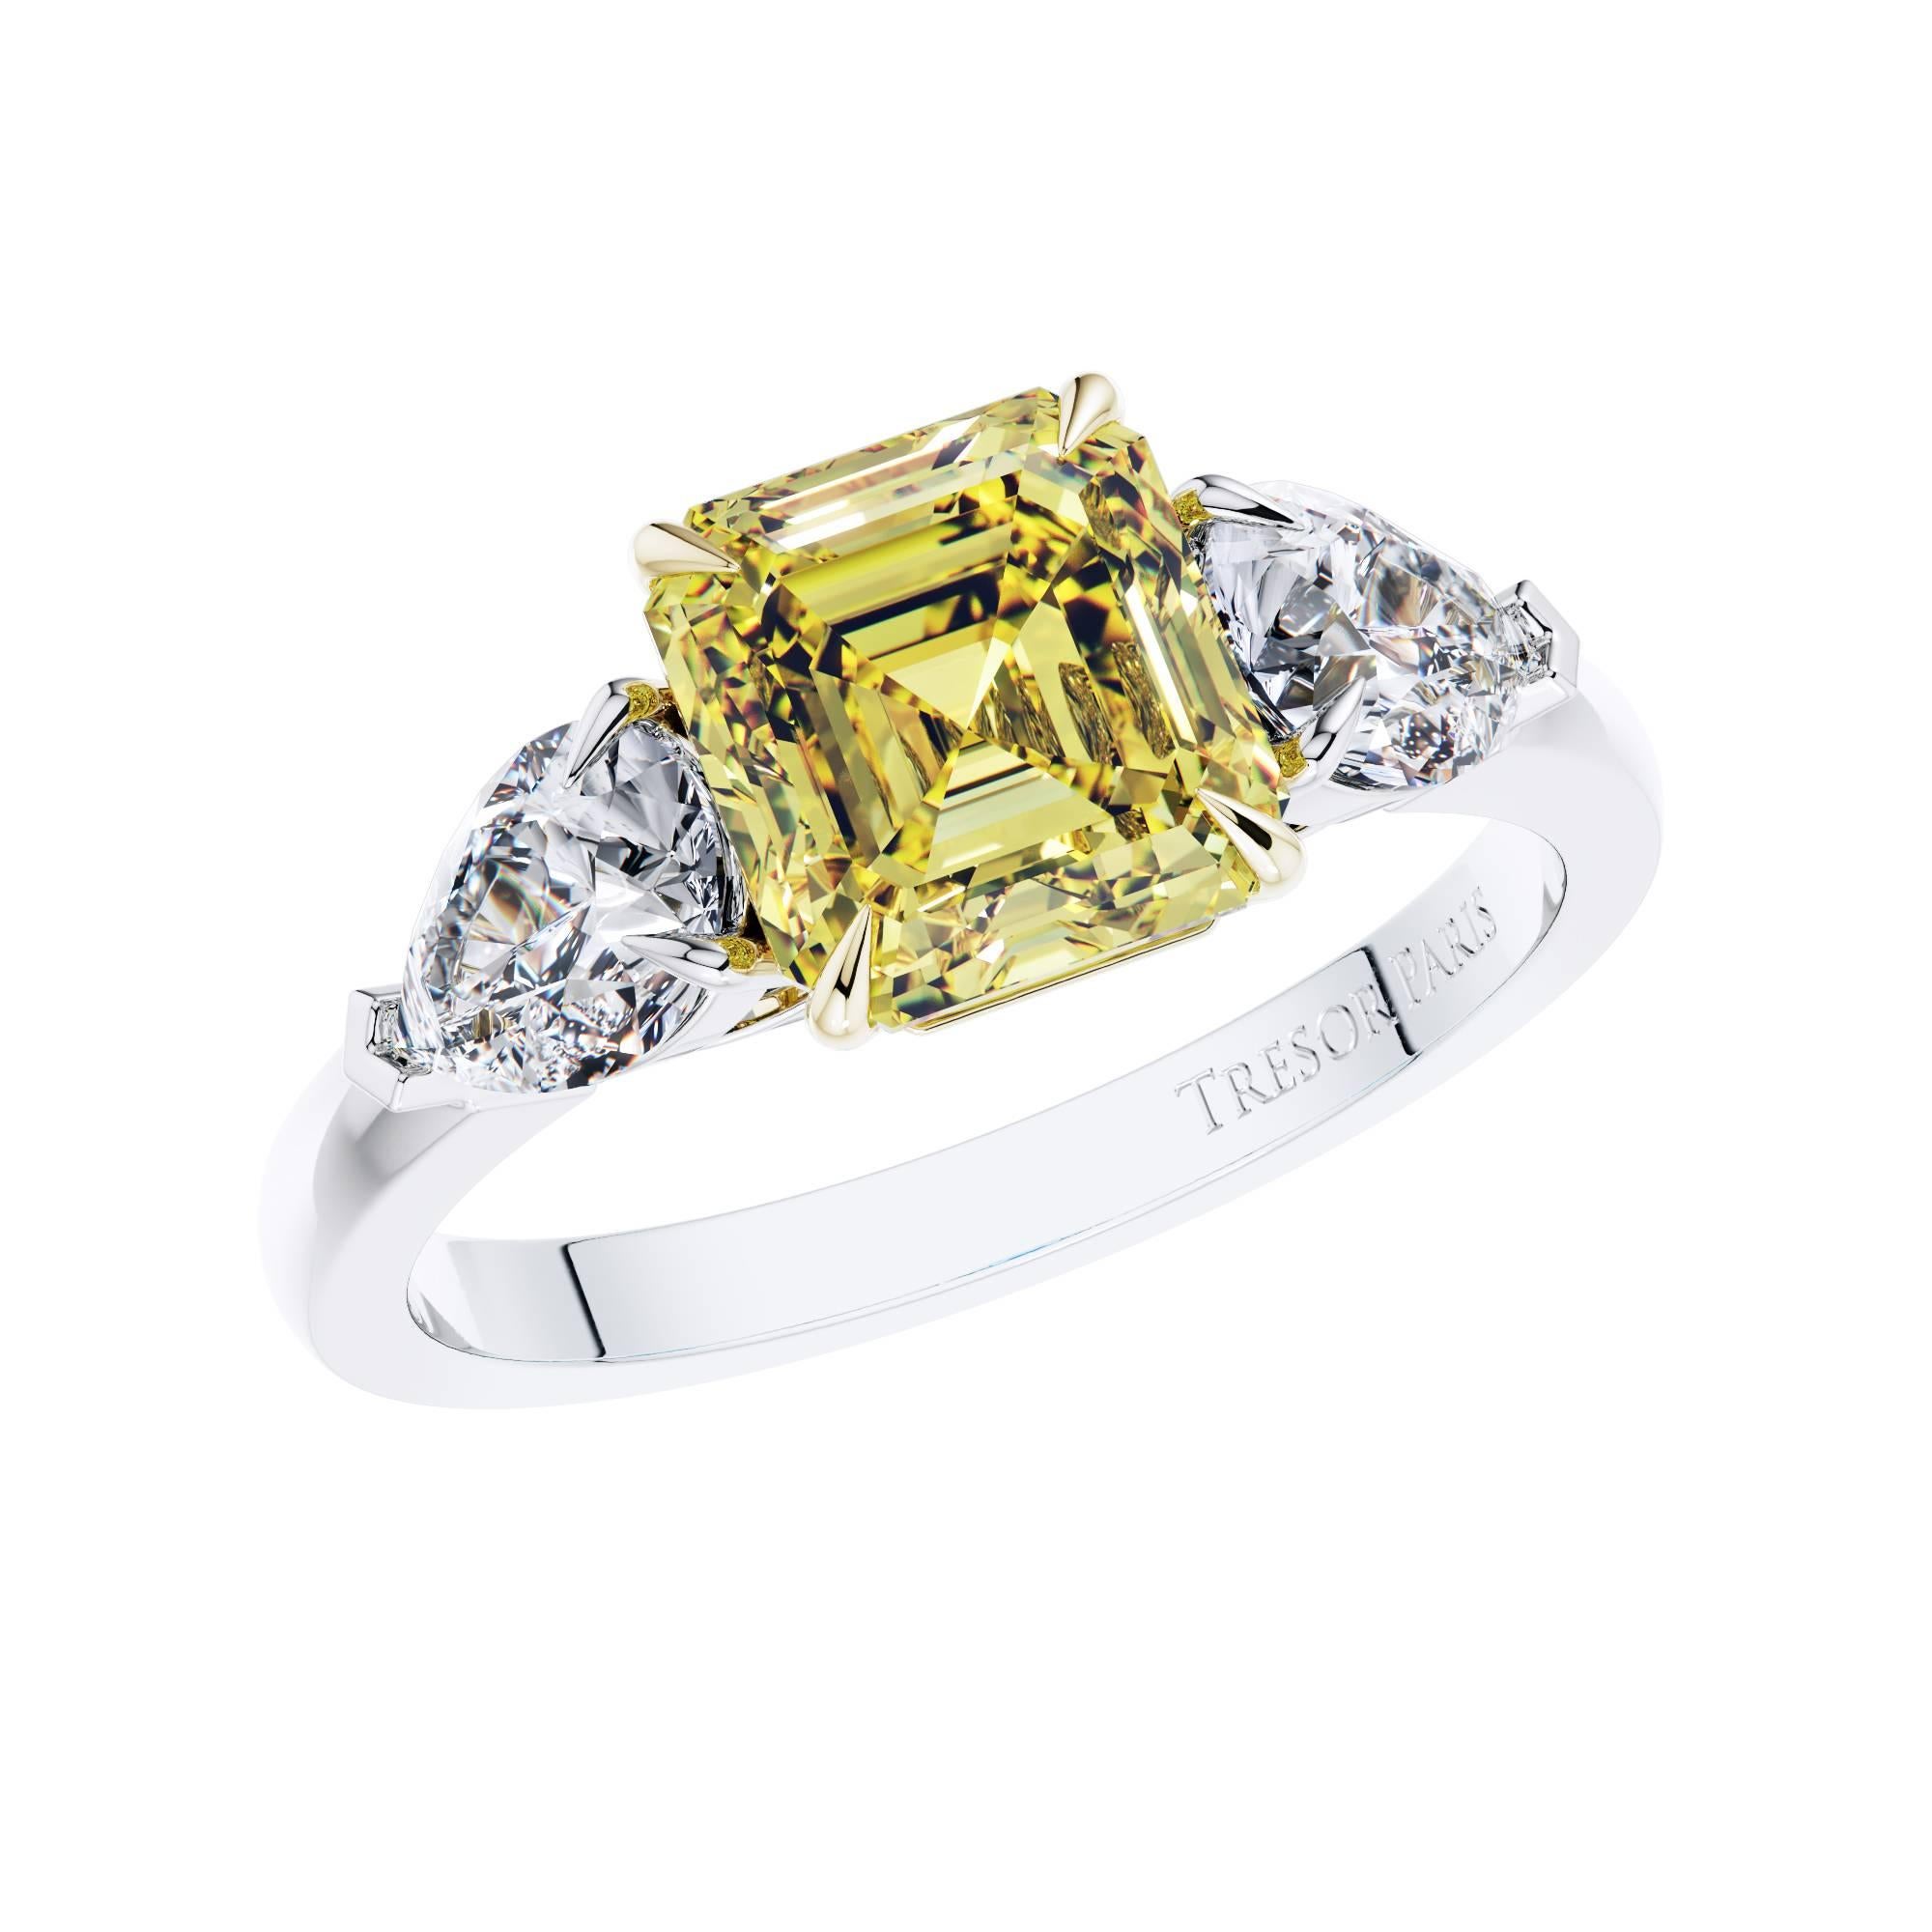 This spectacularly rare GIA Certified Asscher Cut and Pear Shape 3 stone Diamond Engagement ring set in Platinum will suit the modern bride, with 2.19 Carat Asscher Cut Fancy Vivid Yellow VS1 Diamond in the center and 2 GIA Certified Pear Shape